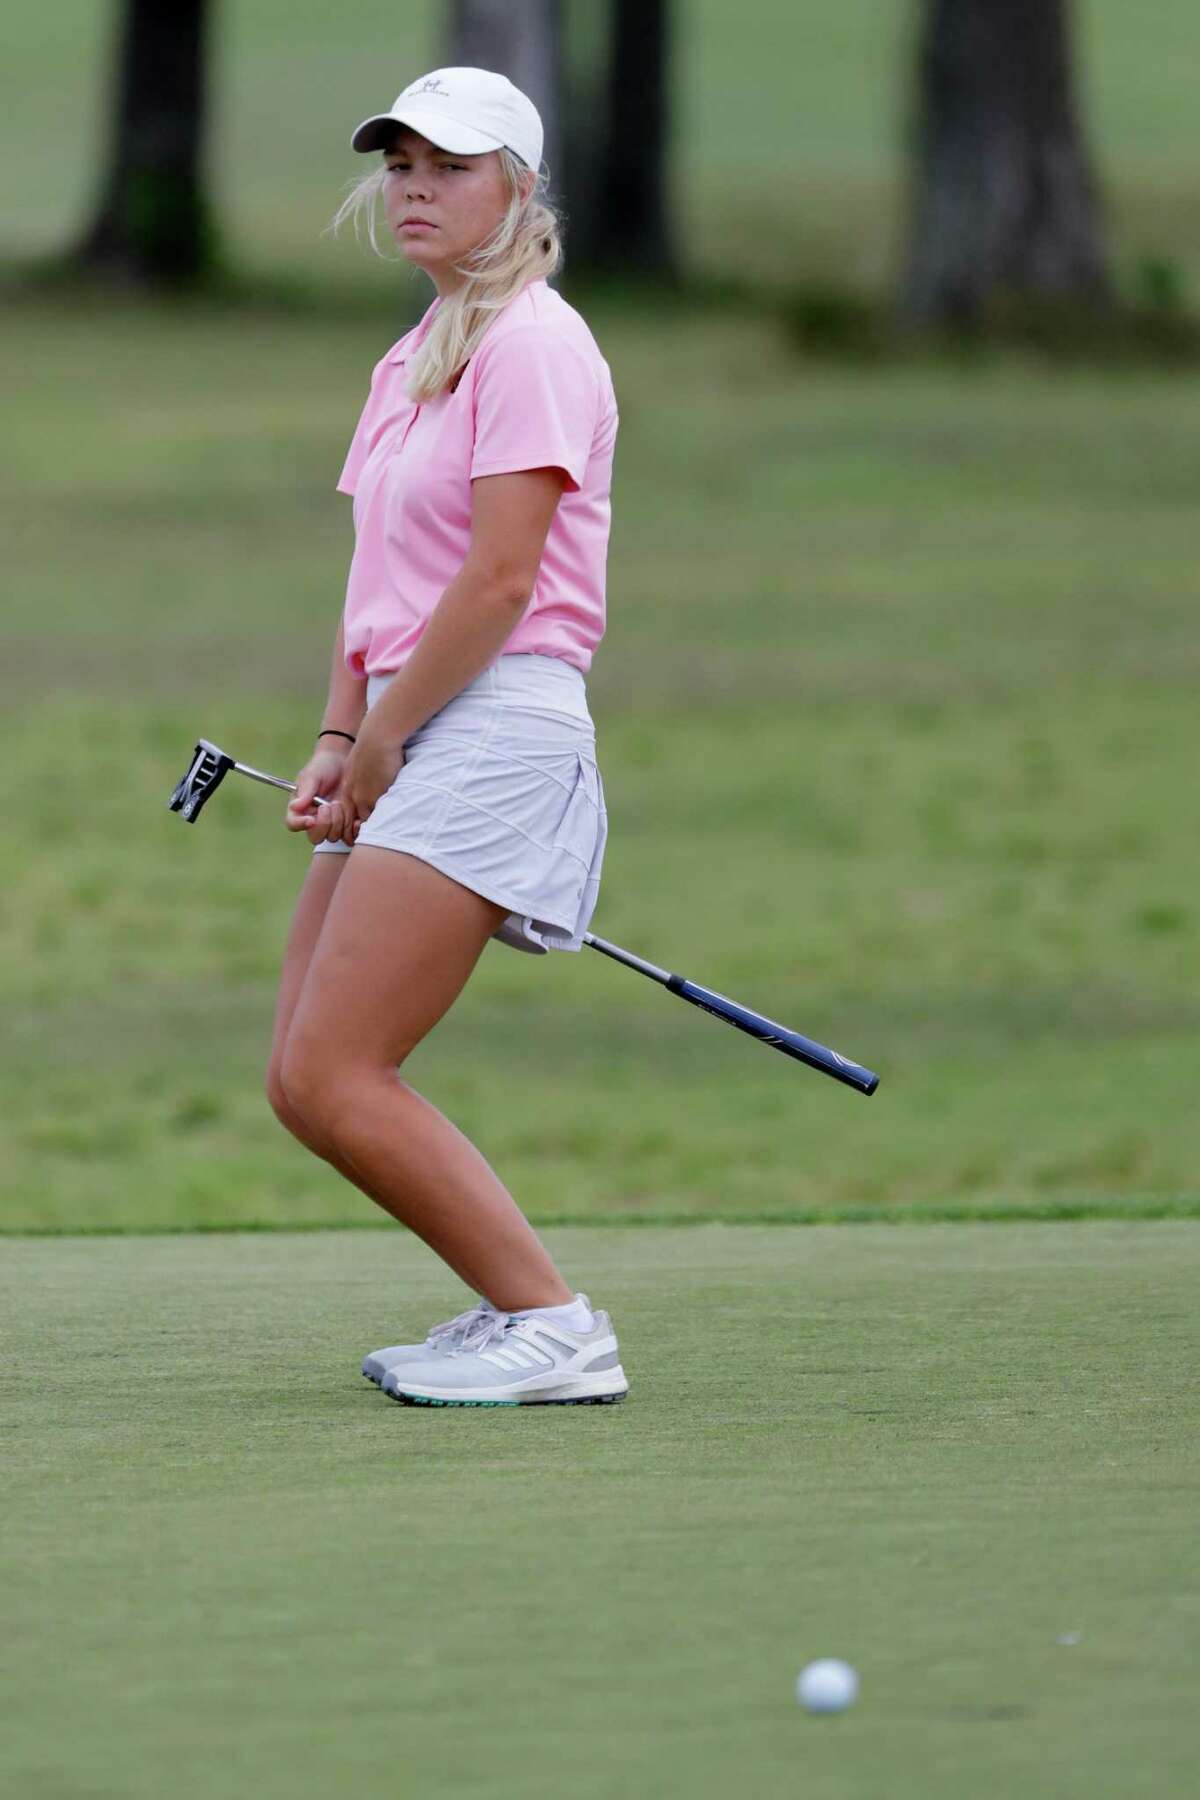 Melanie Maier of George Ranch reacts to missing her putt on the 9th hole during the second round of the Region III-6A Girls Golf Tournament held at Eagle Pointe Golf ClubTuesday, Apr. 19, 2022 in Mont Belvieu, TX.